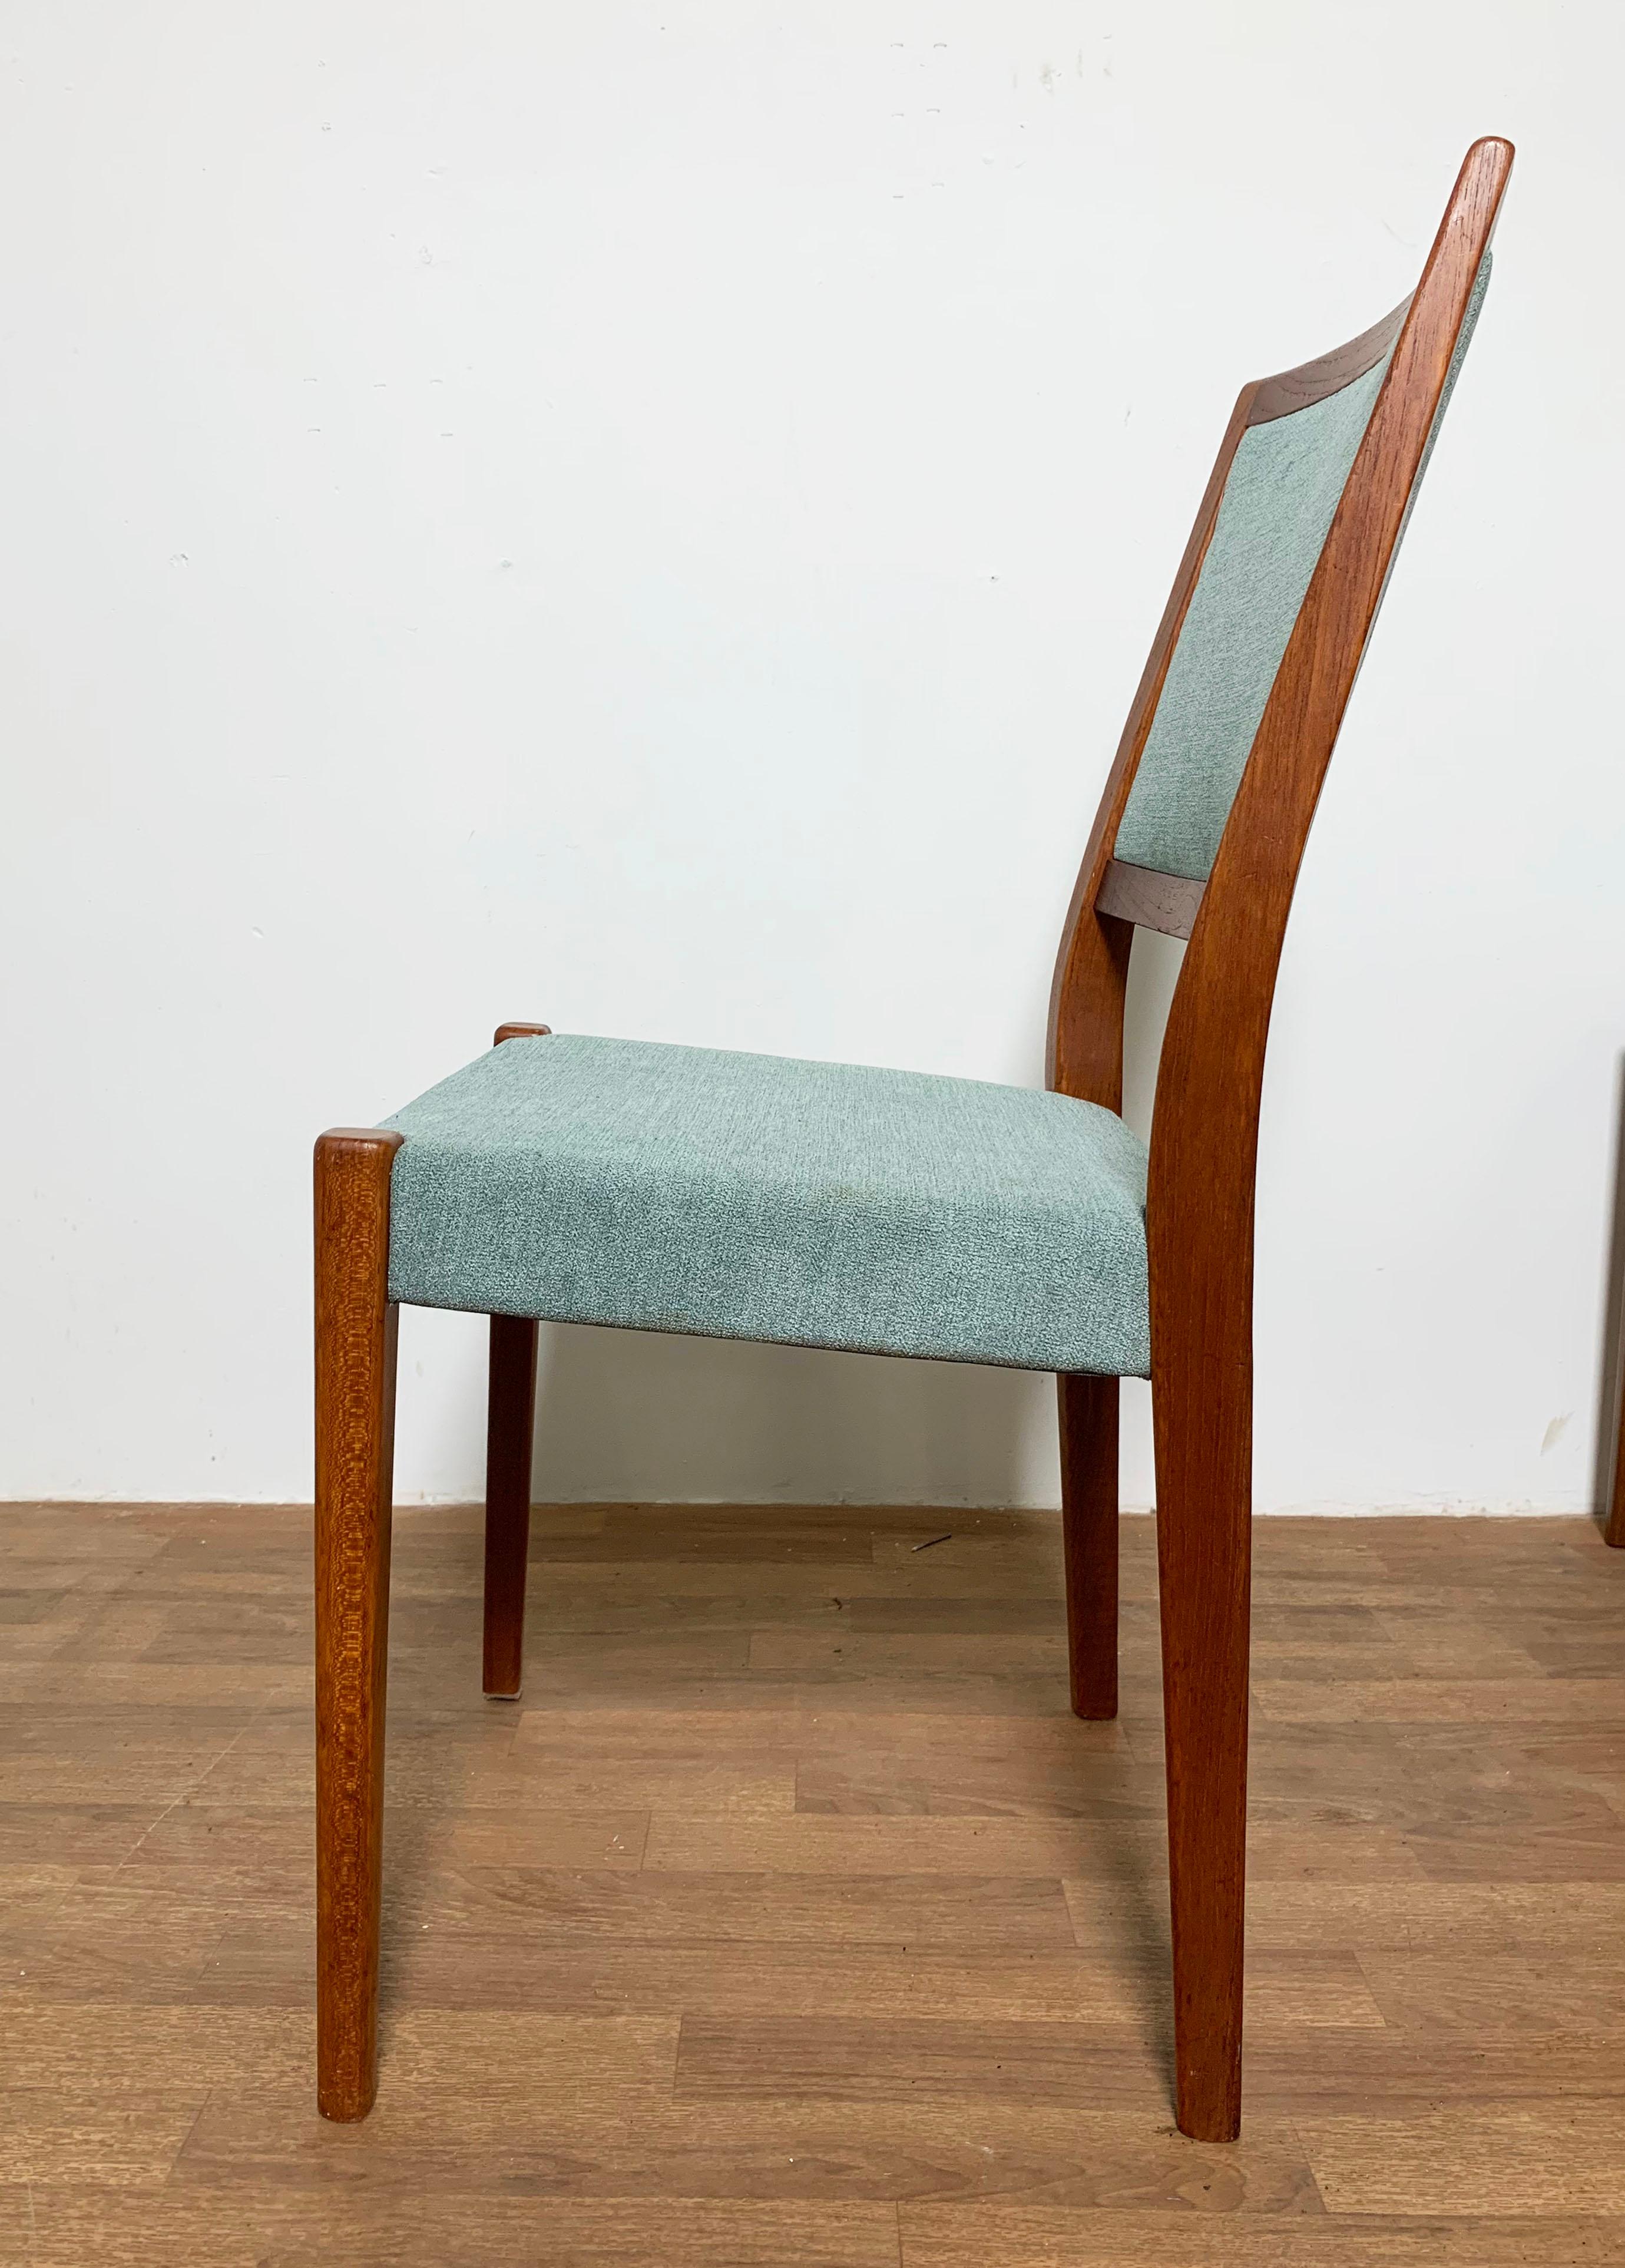 Set of twelve Scandinavian modern teak dining chairs by Svegards, made in Sweden, circa 1970s. Set consists of one arm chair and eleven side chairs.

Side chairs measure 18